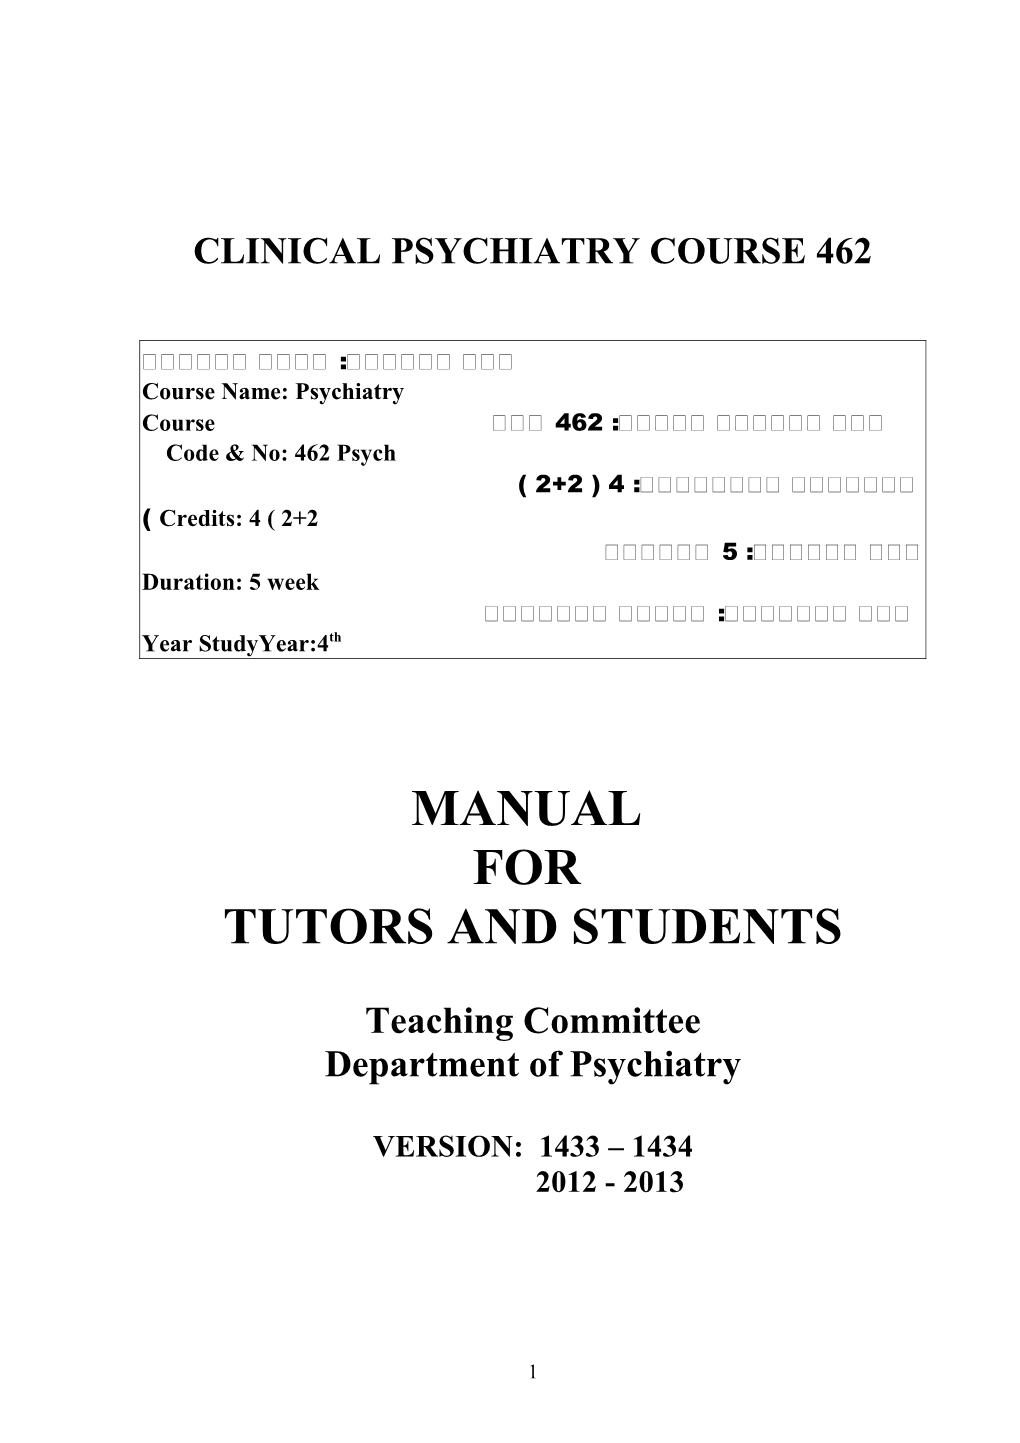 Clinical Psychiatry Course 462